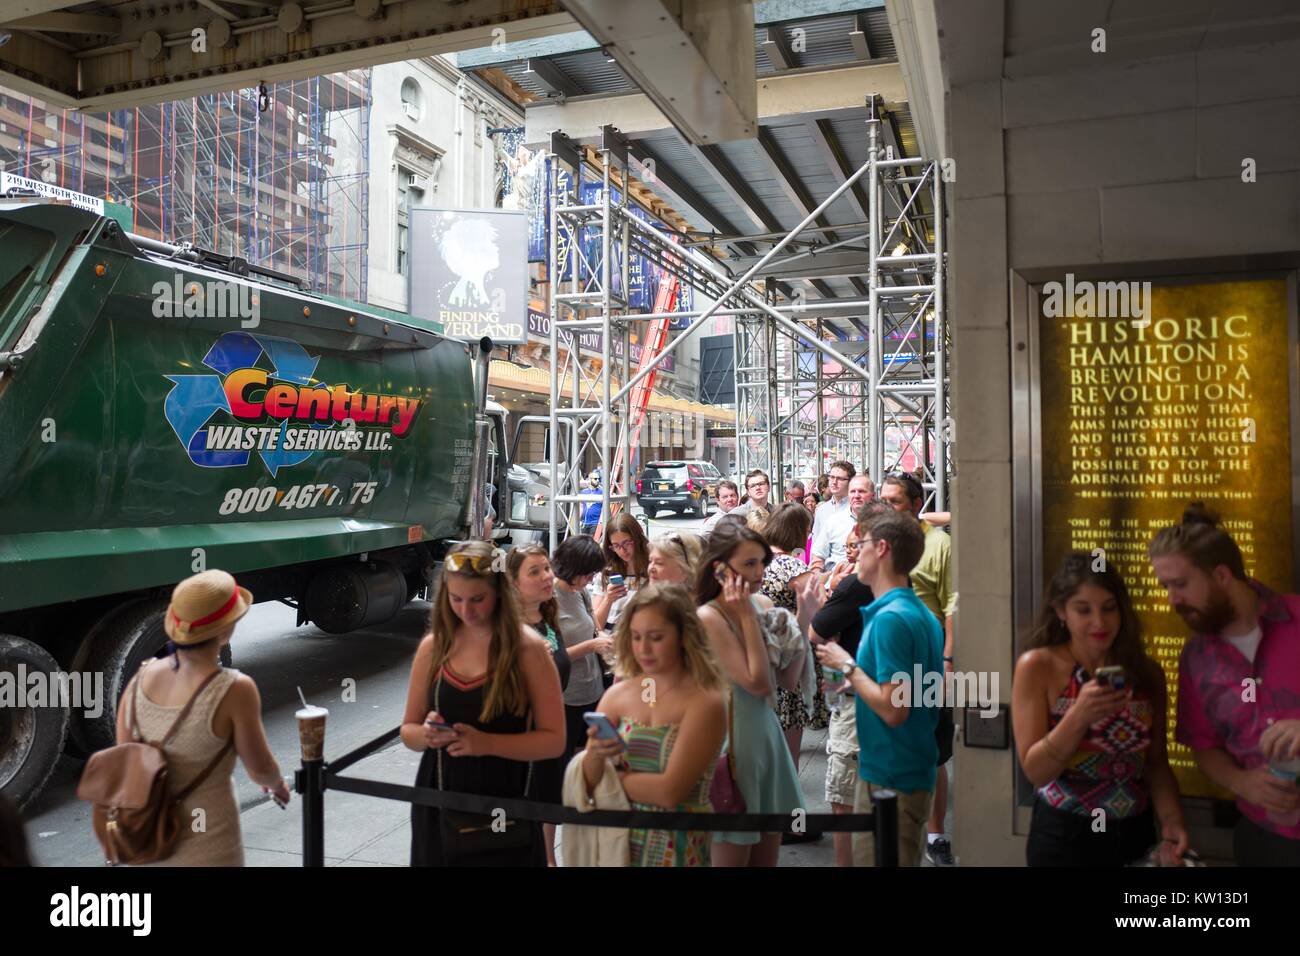 Before a performance of the Broadway musical Hamilton two days prior to creator Lin Manuel Miranda's departure from the show, fans wait in line and prepare to enter the Richard Rodgers theatre, New York City, New York, July 7, 2016. Stock Photo